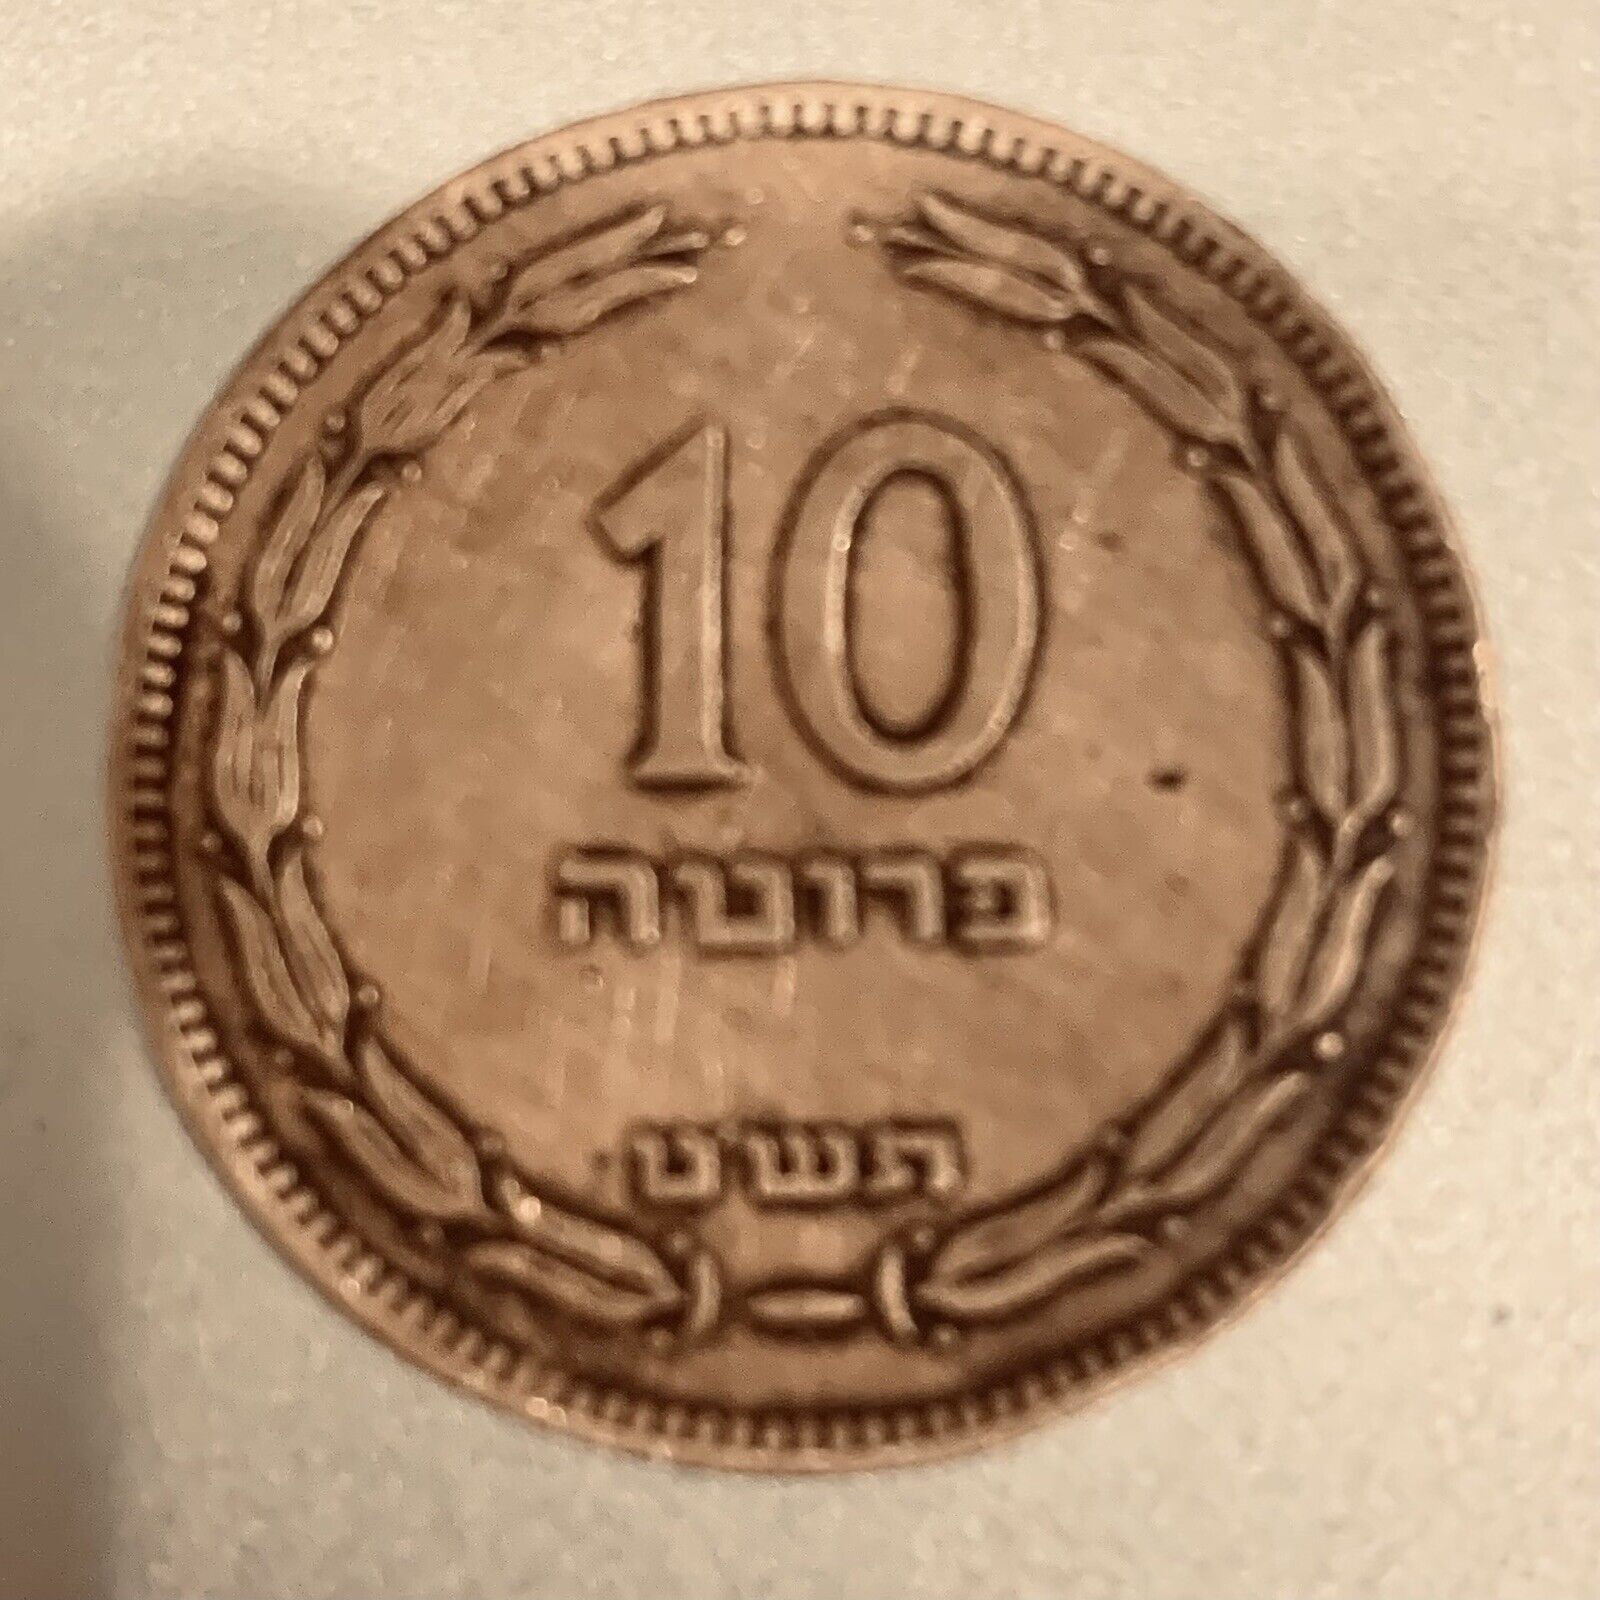 ISRAEL Coin 10 PRUTA 1949............ Antique Coin Israeli Money From 1949